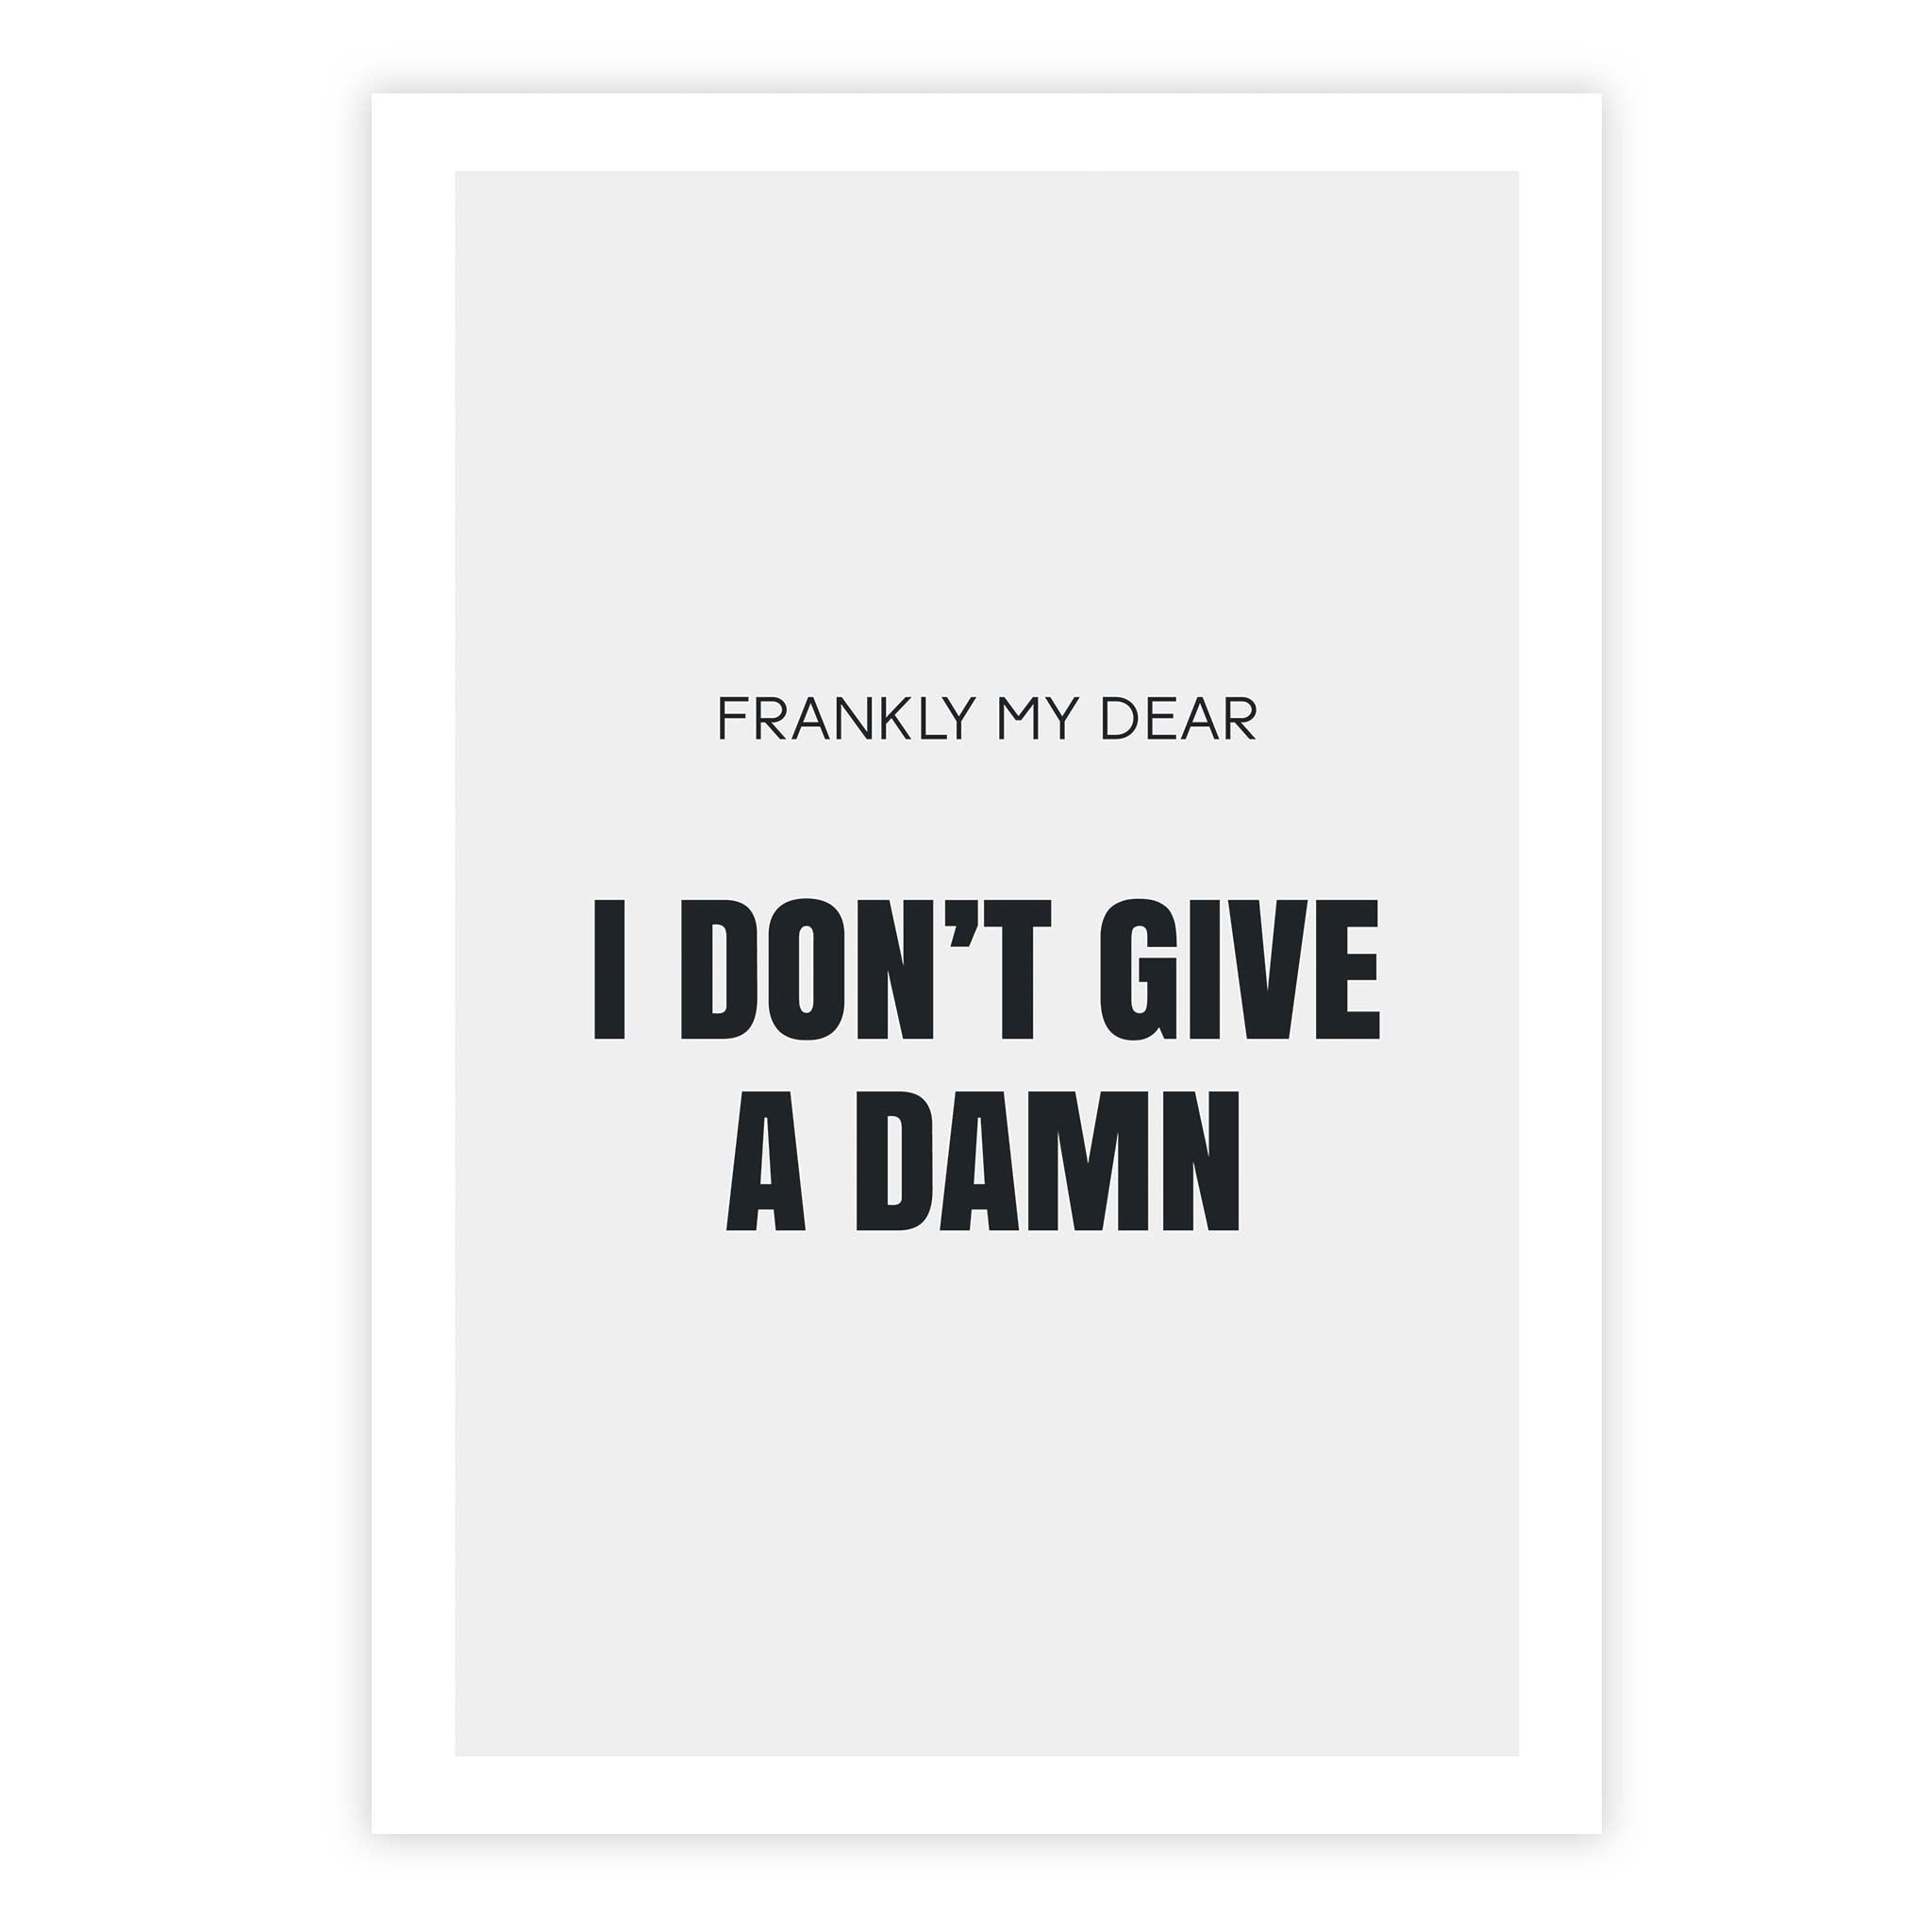 Frankly my dear I don’t give a damn